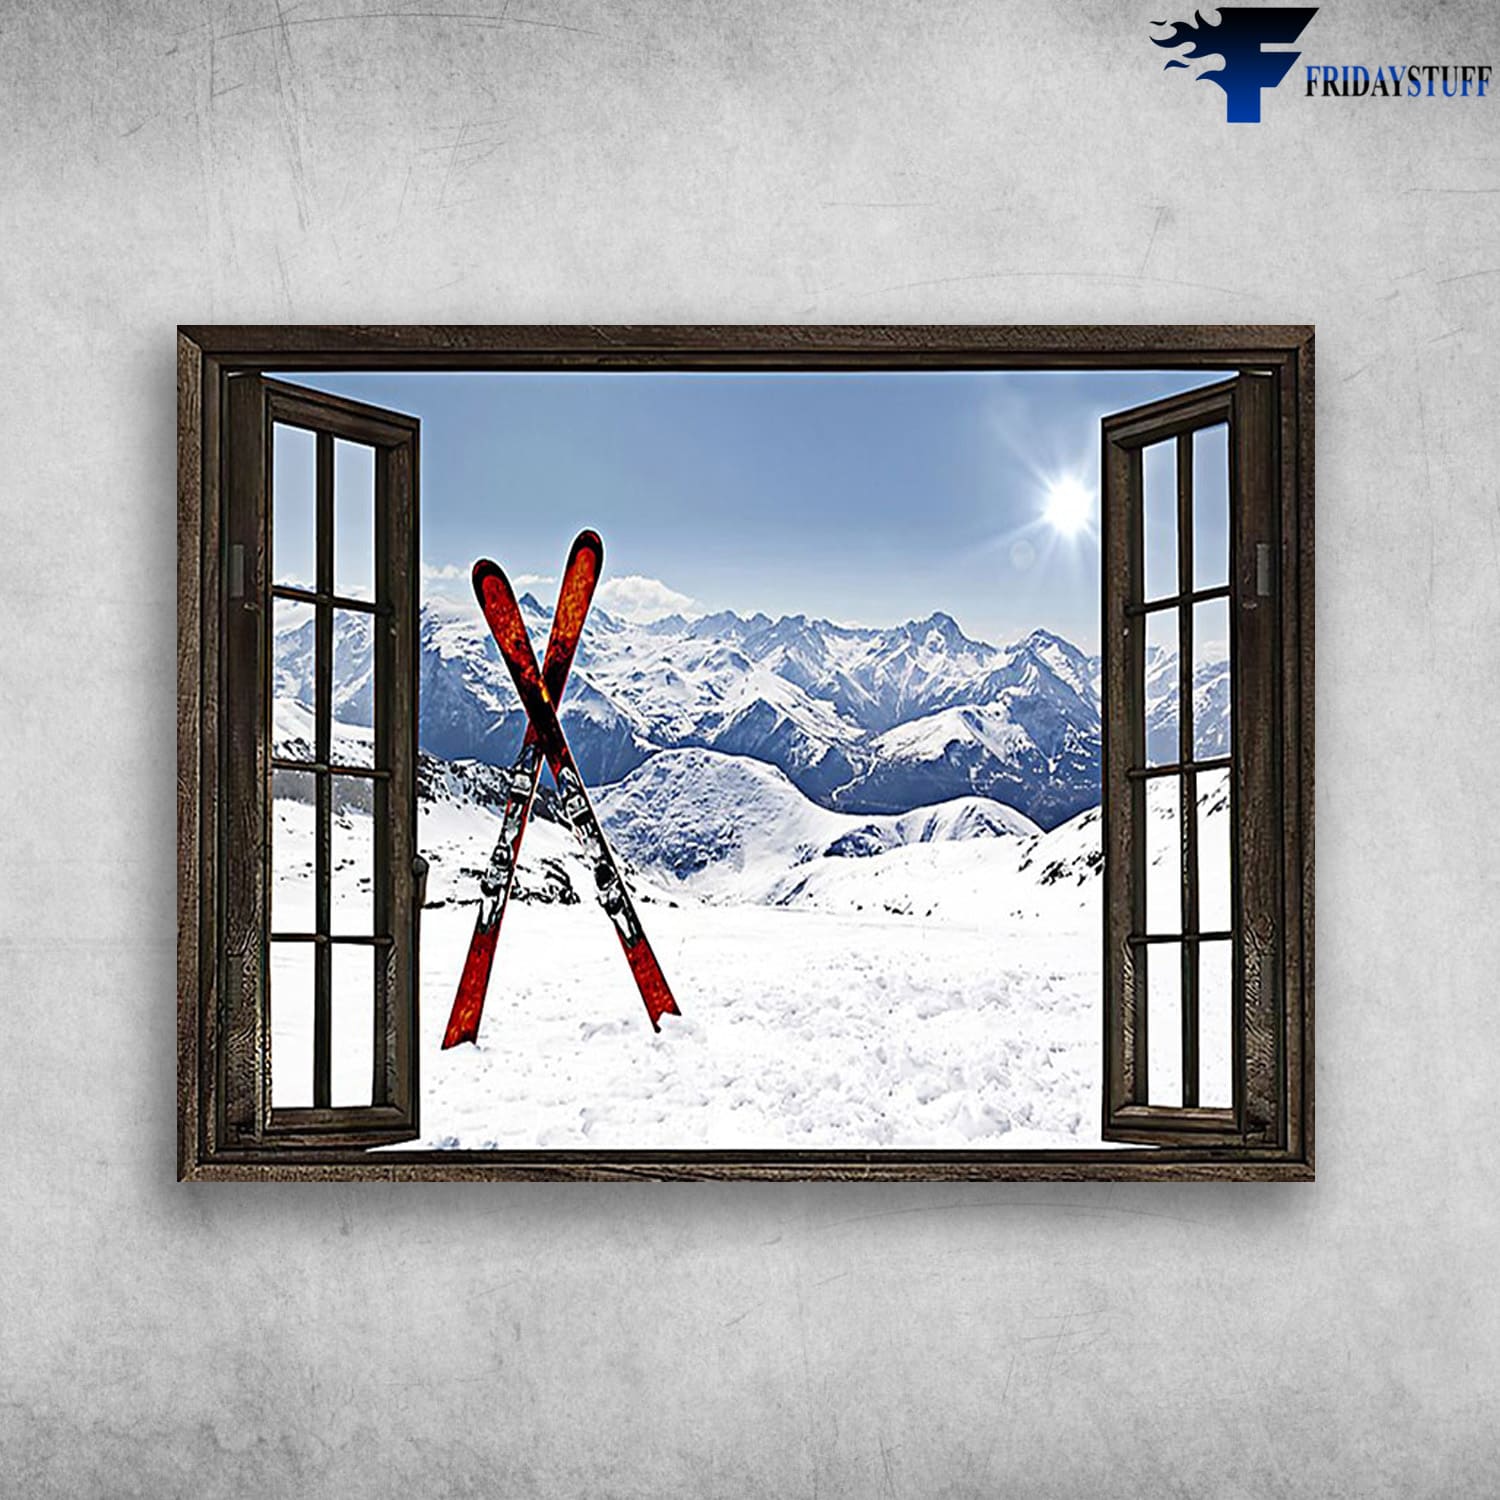 Skiing Poster, Skiing Lover, Window Poster